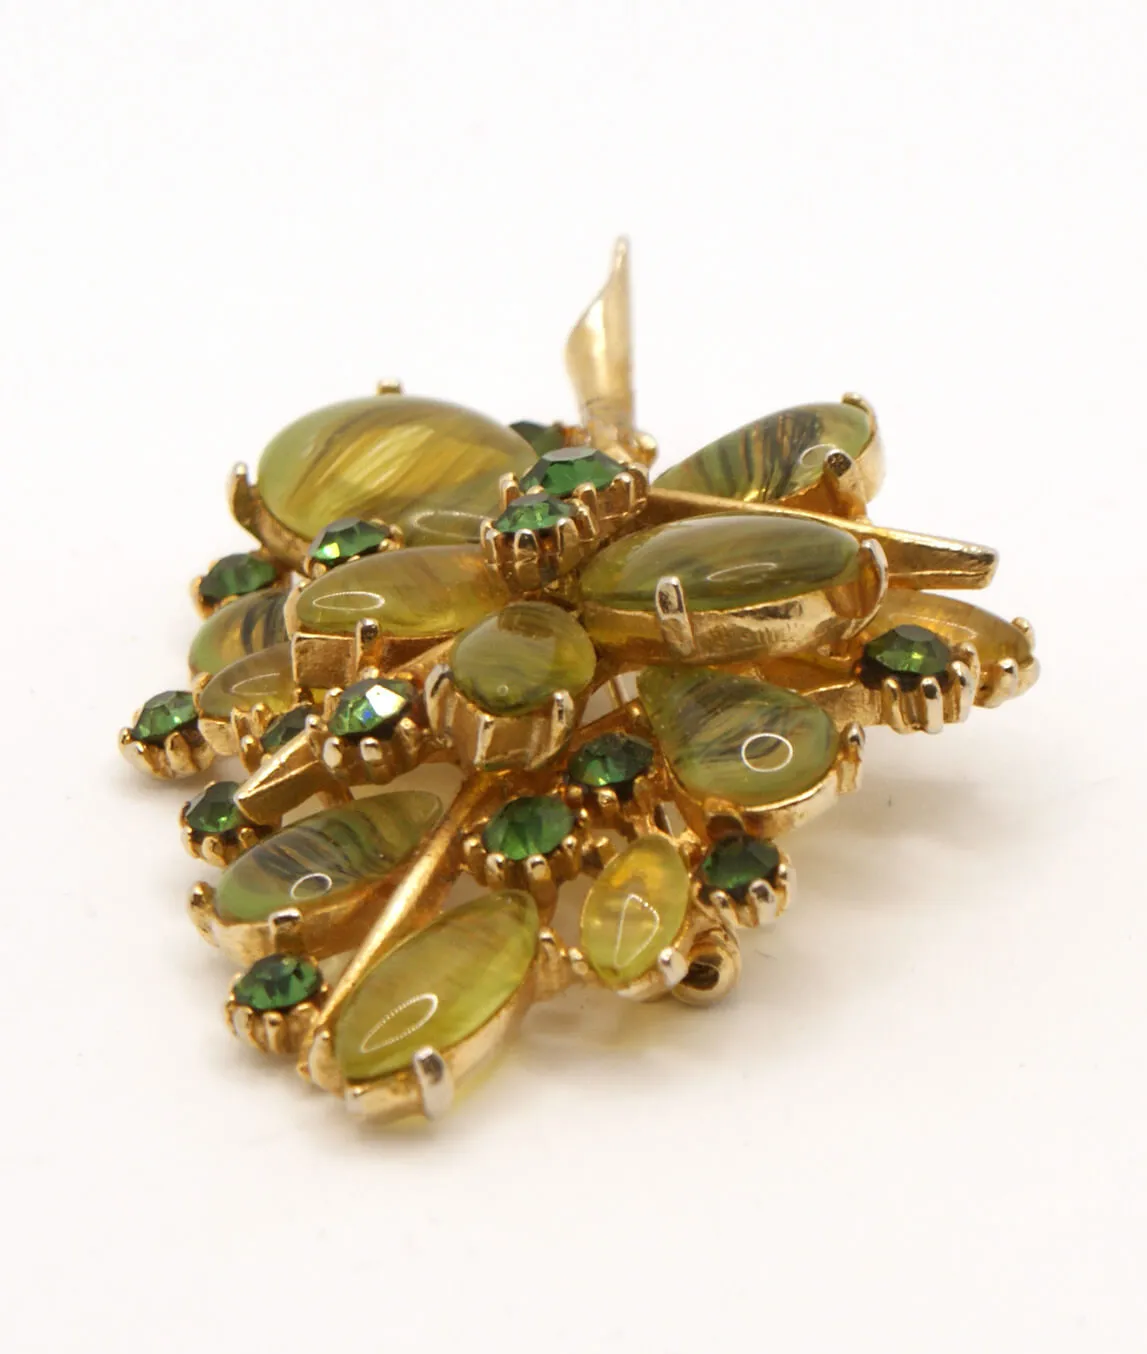 Vintage ART brooch with green stones